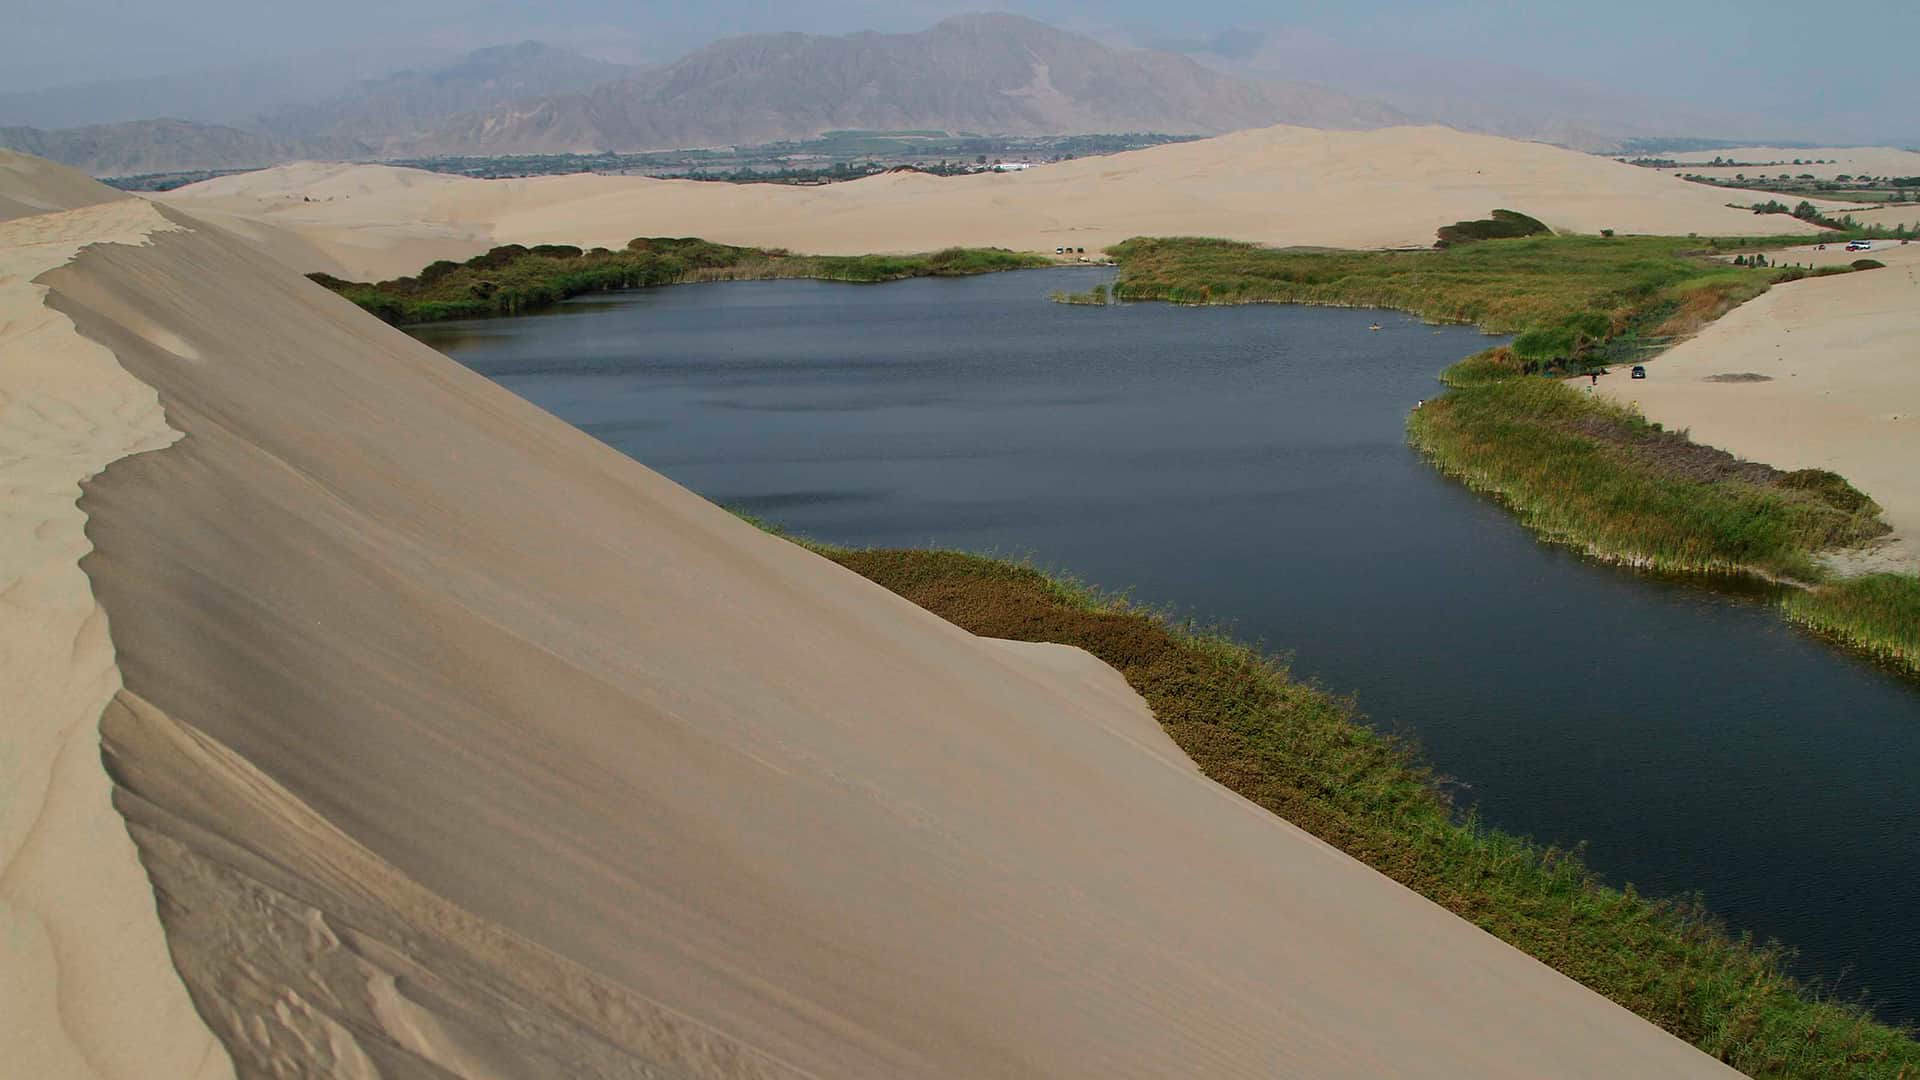 The Moron Lagoon is an Oasis in the middle of the desert. It is 300 meters long and 150 meters wide and 8 meters deep | RESPONSible Travel Peru